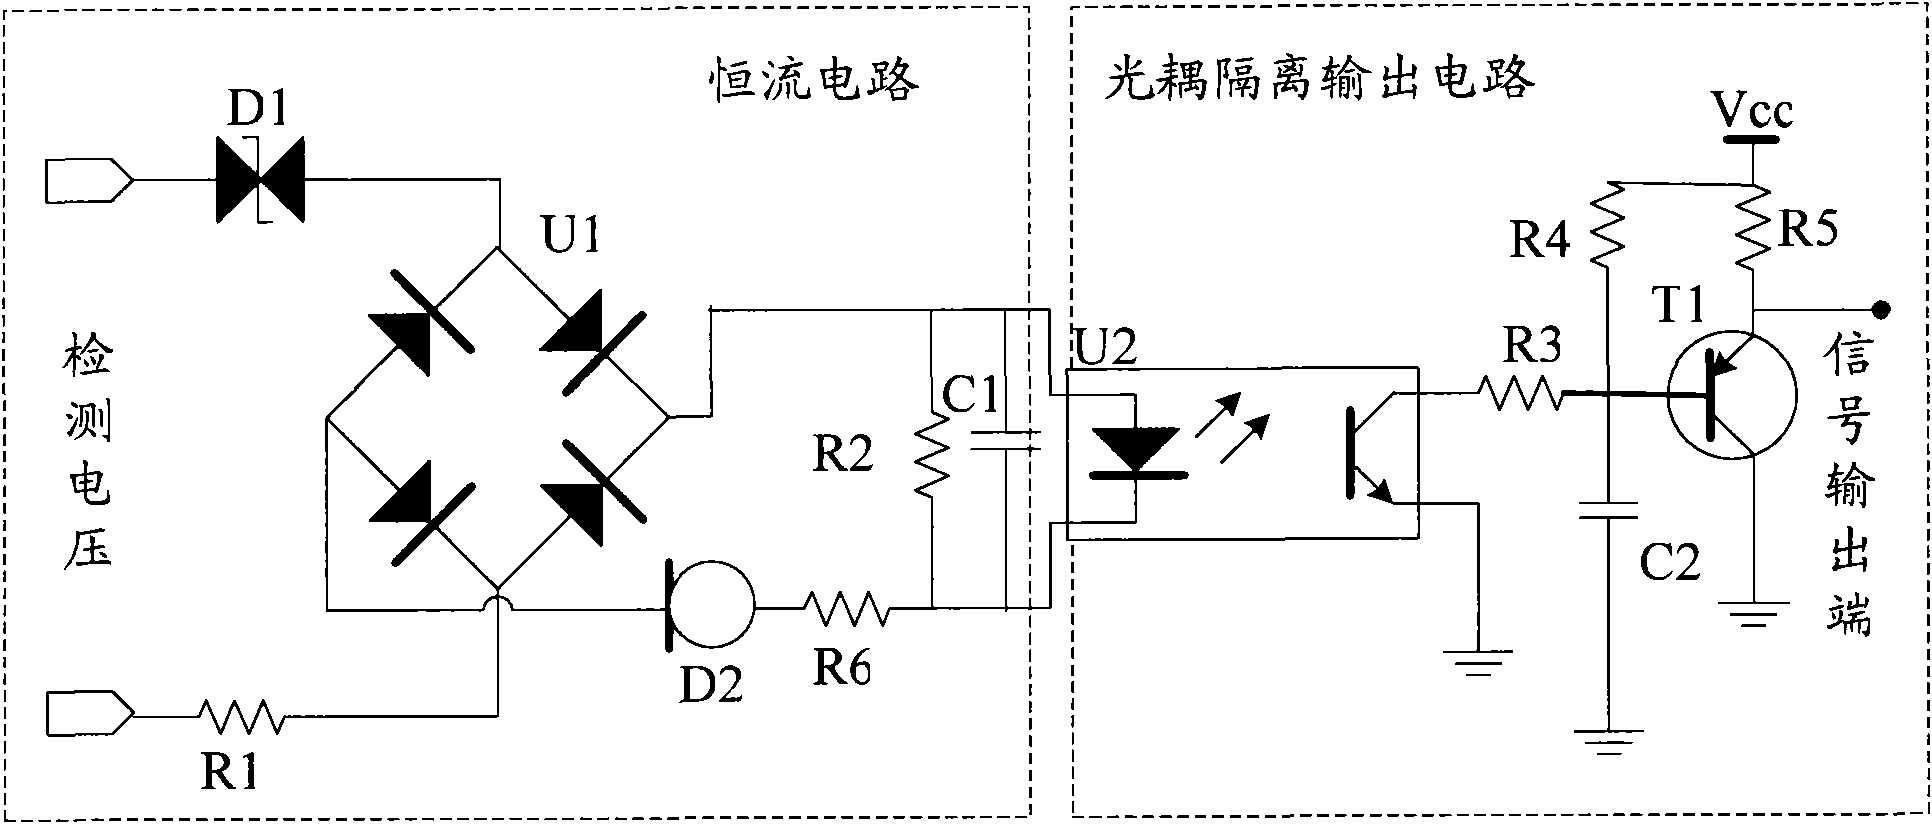 Relay protection device detection circuit